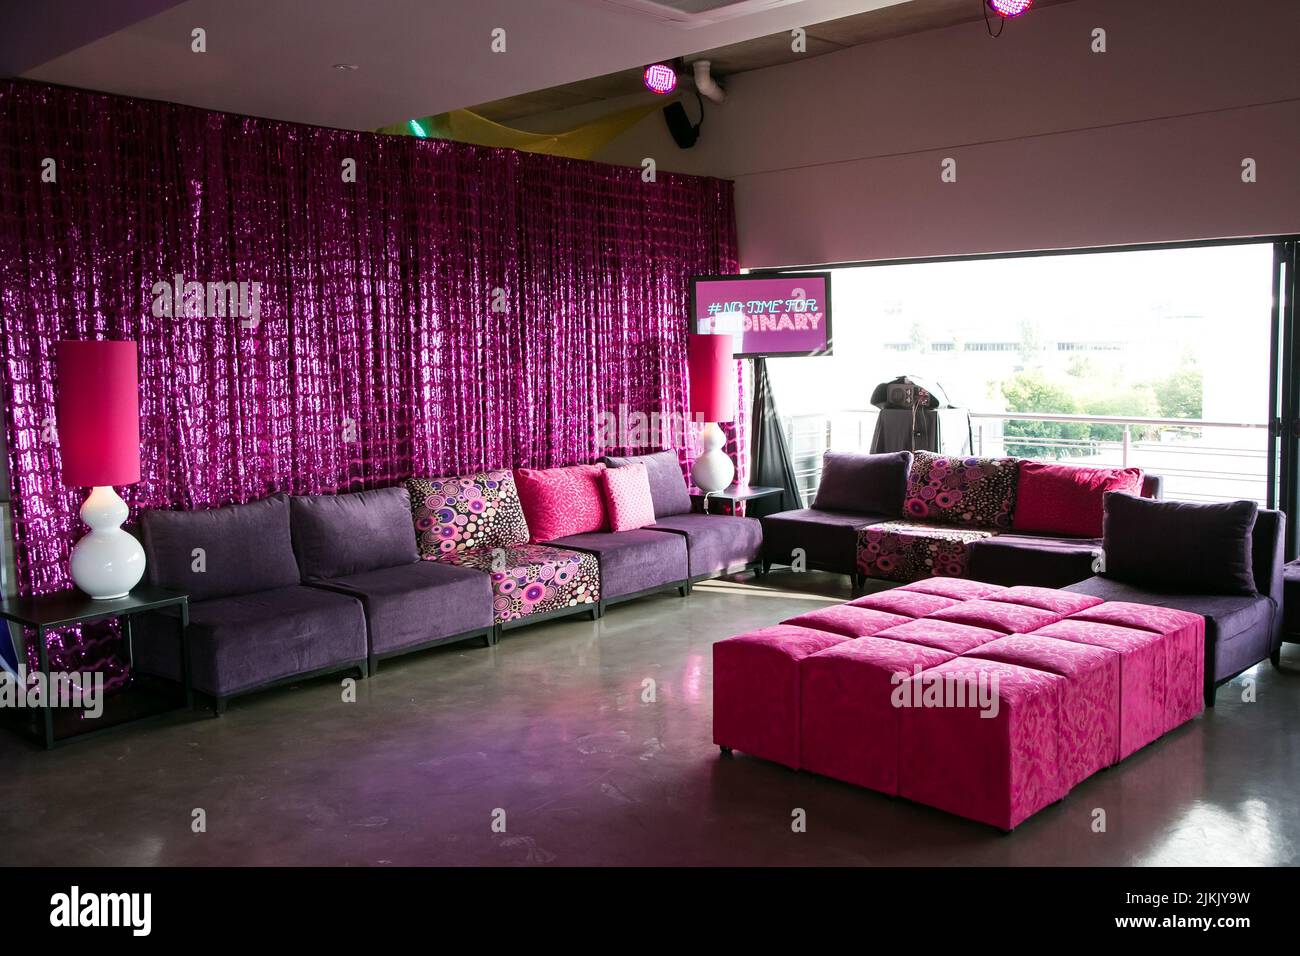 A decorative indoor media party event with pink purple decorations and furniture Stock Photo